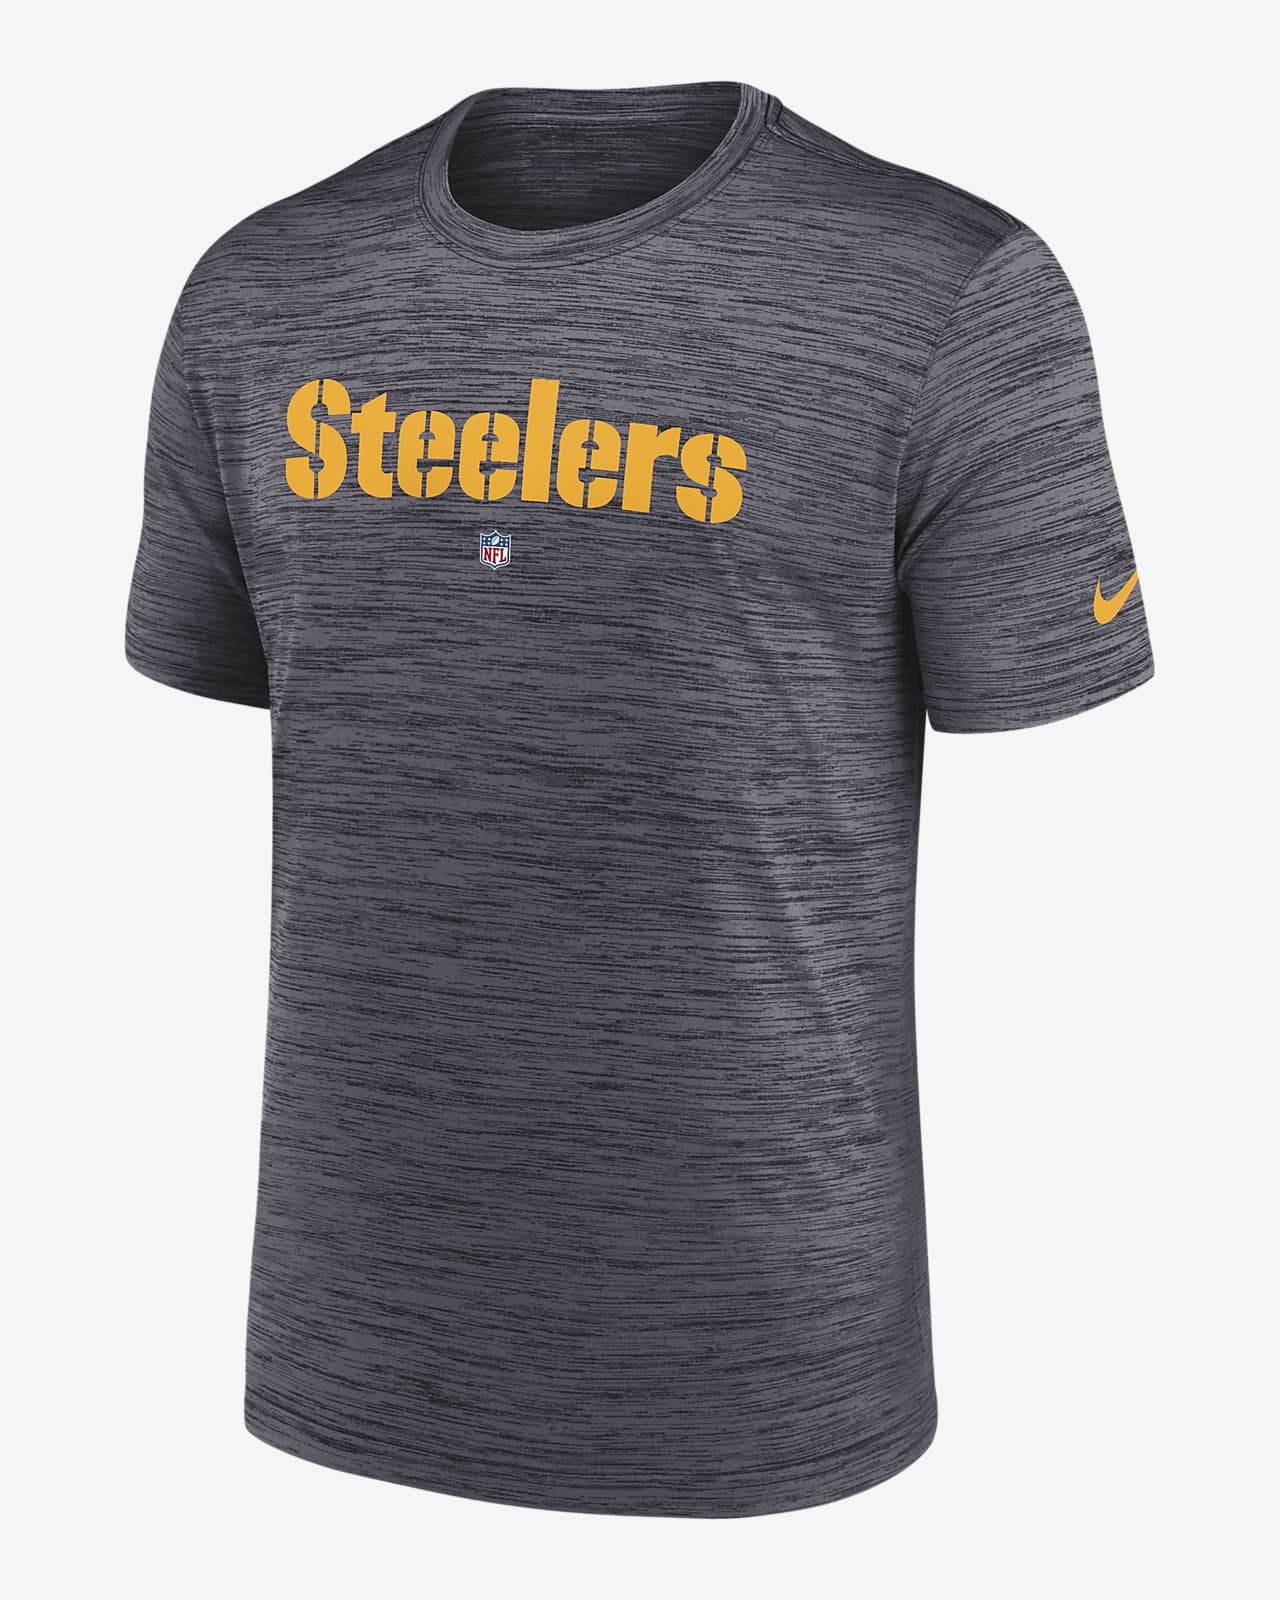 Order your 2023 sideline Pittsburgh Steelers hats now